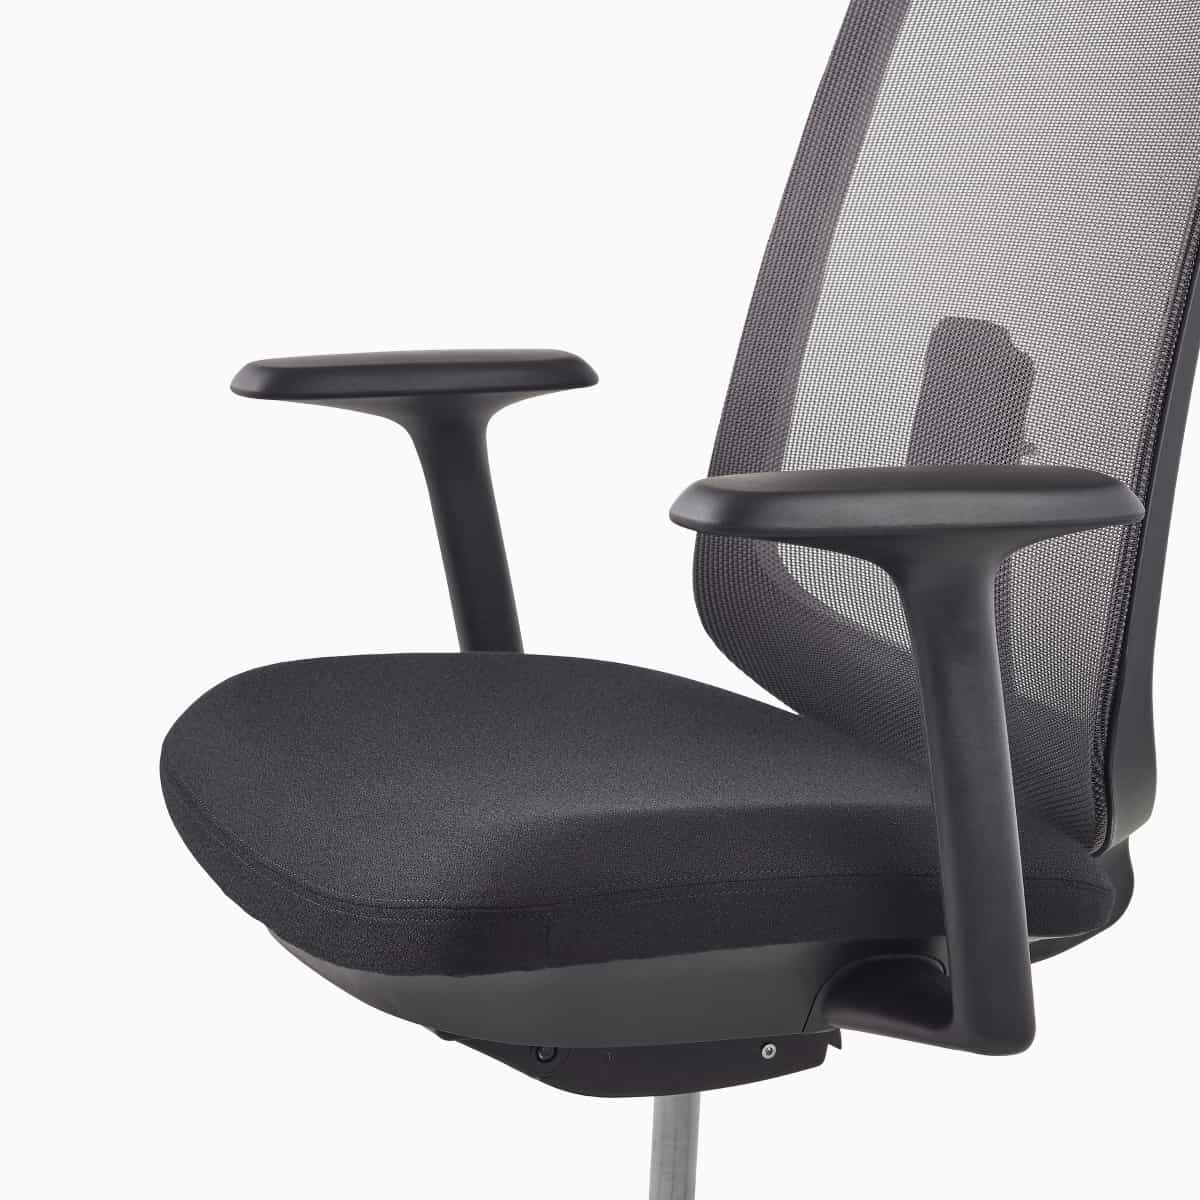 A close-up of a Verus Chair's upholstered seat and suspension back with fixed arms.